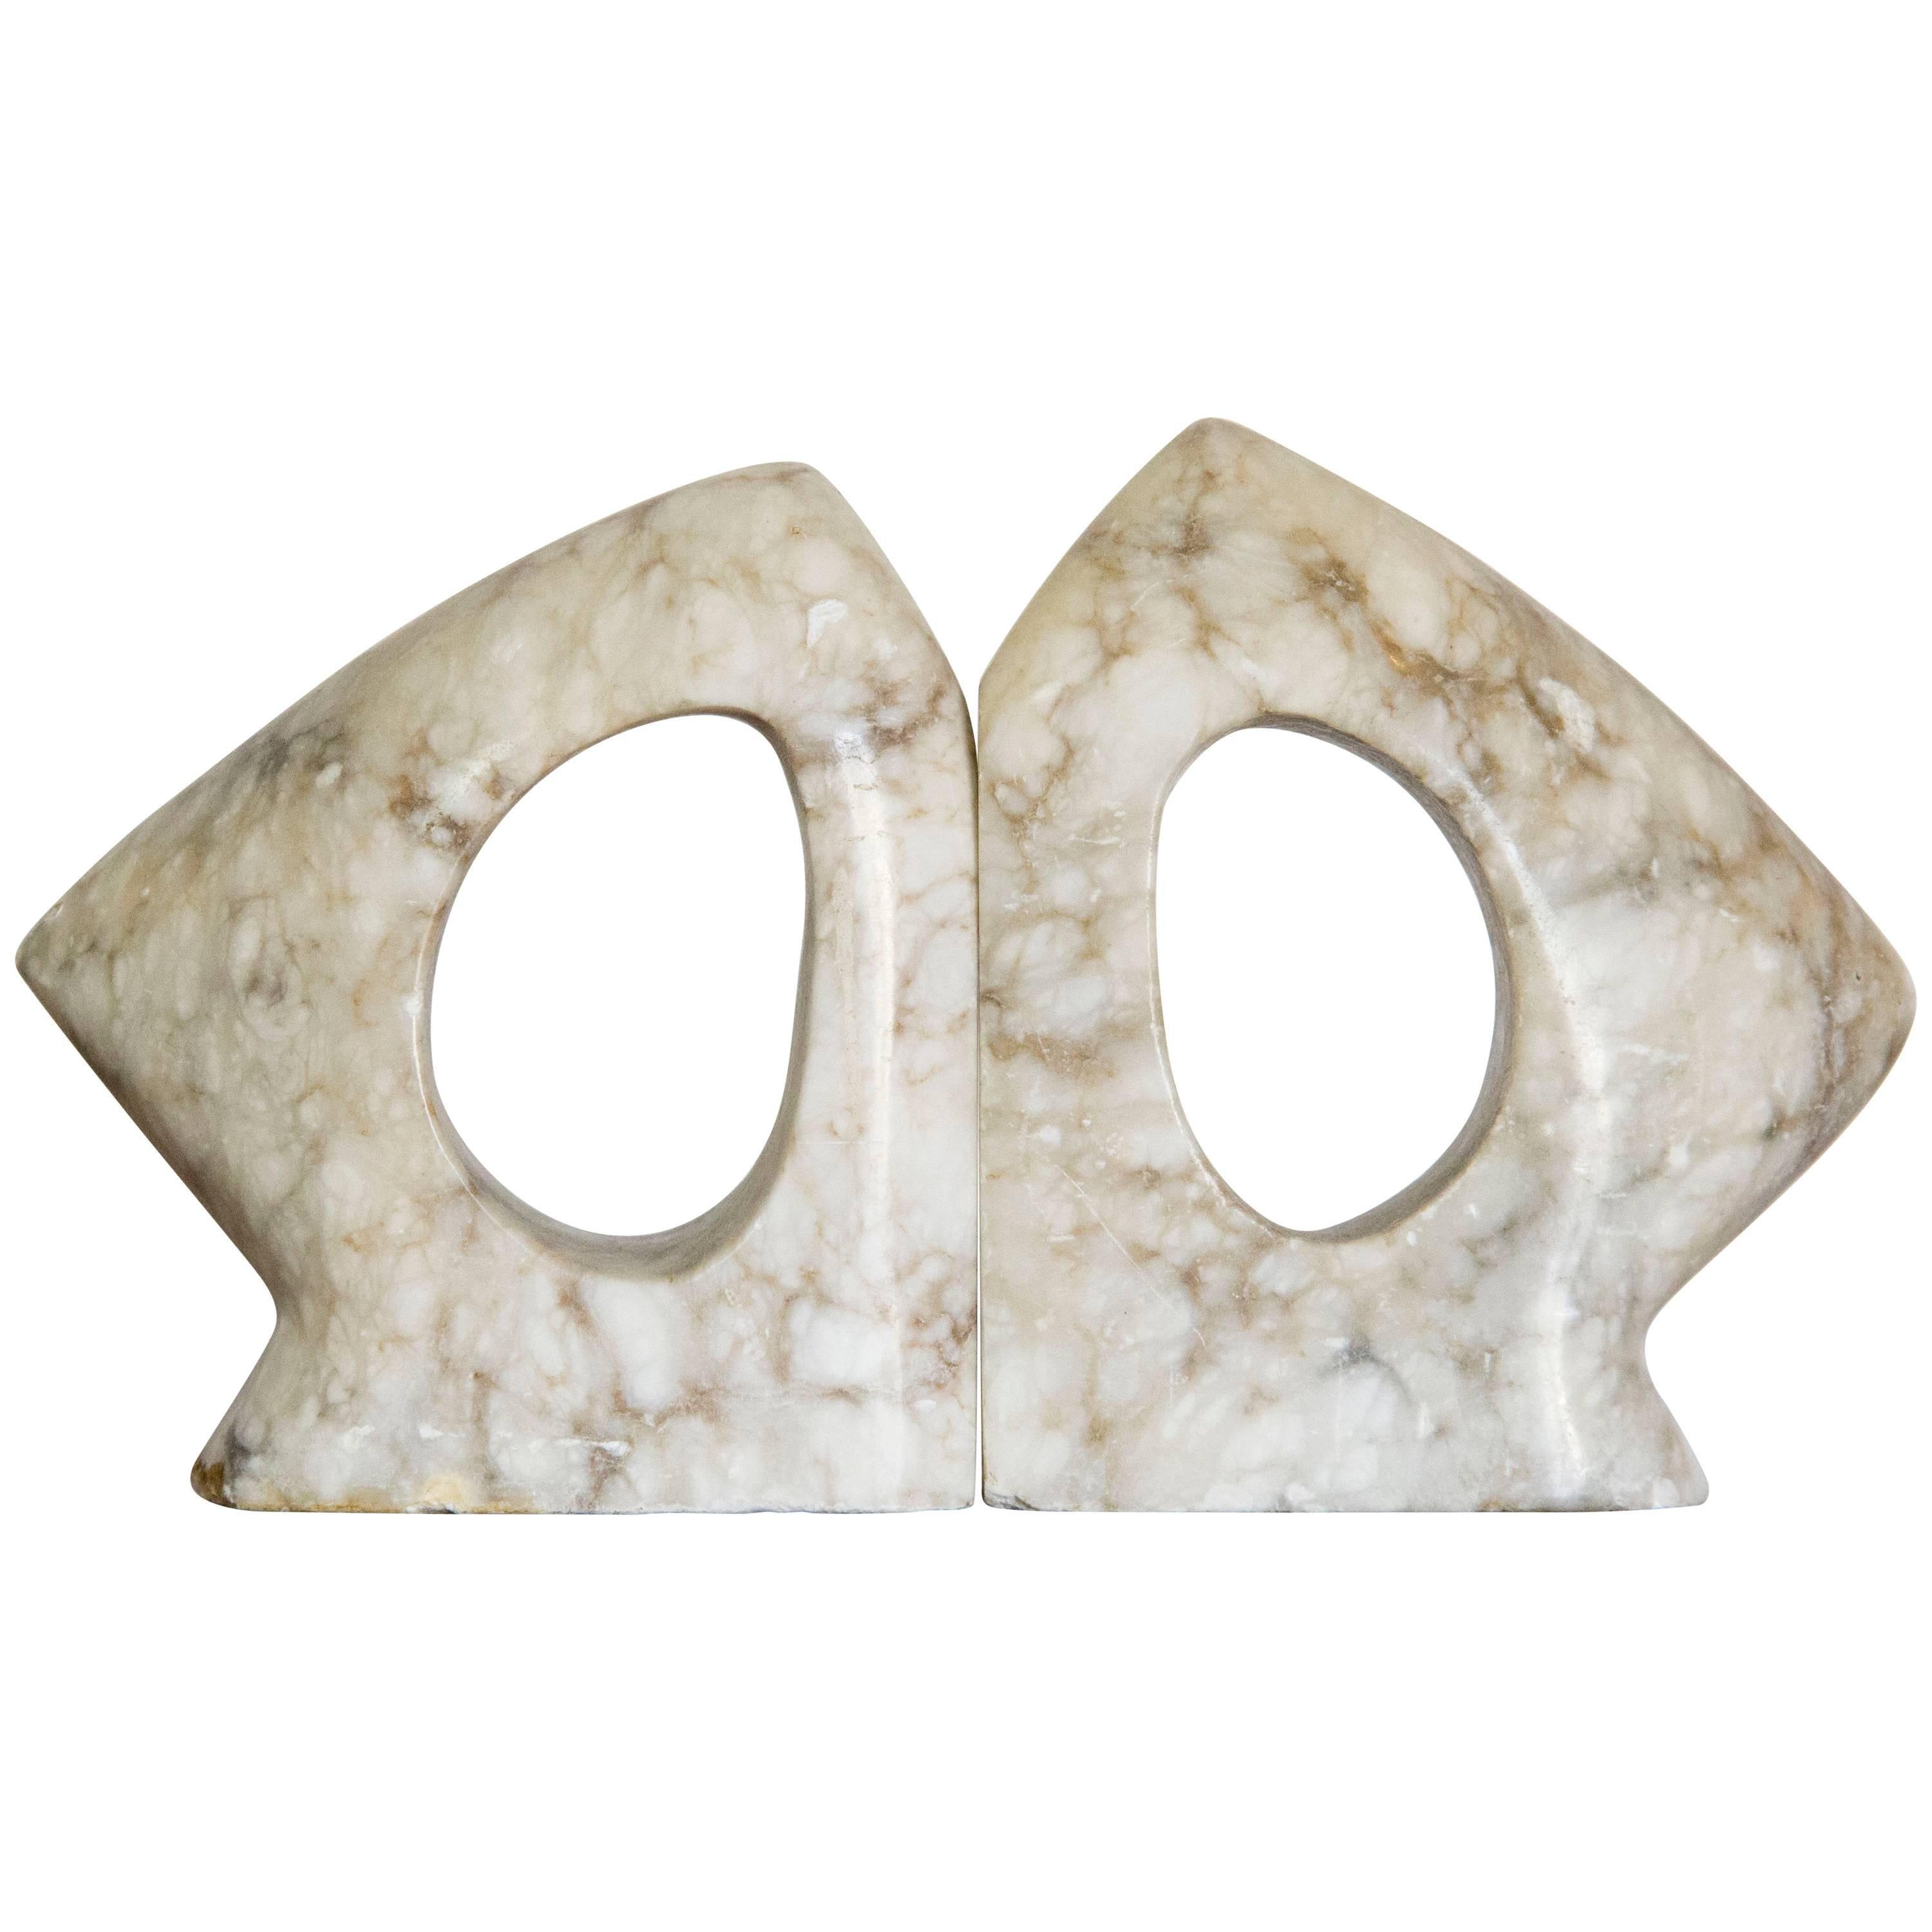 Sculptural Pair of Mid-Century Modern Marble Bookends For Sale